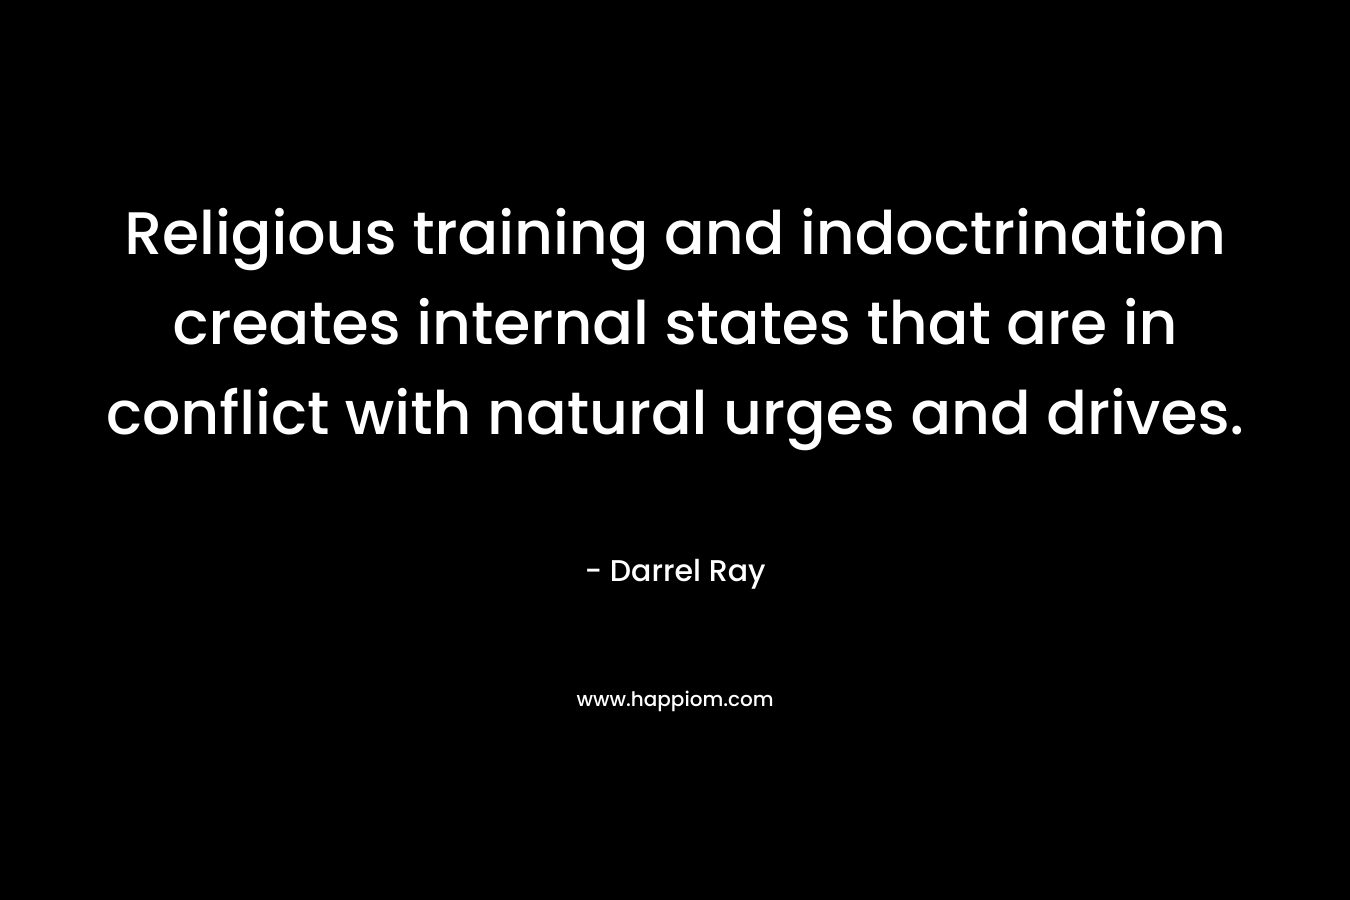 Religious training and indoctrination creates internal states that are in conflict with natural urges and drives. – Darrel Ray